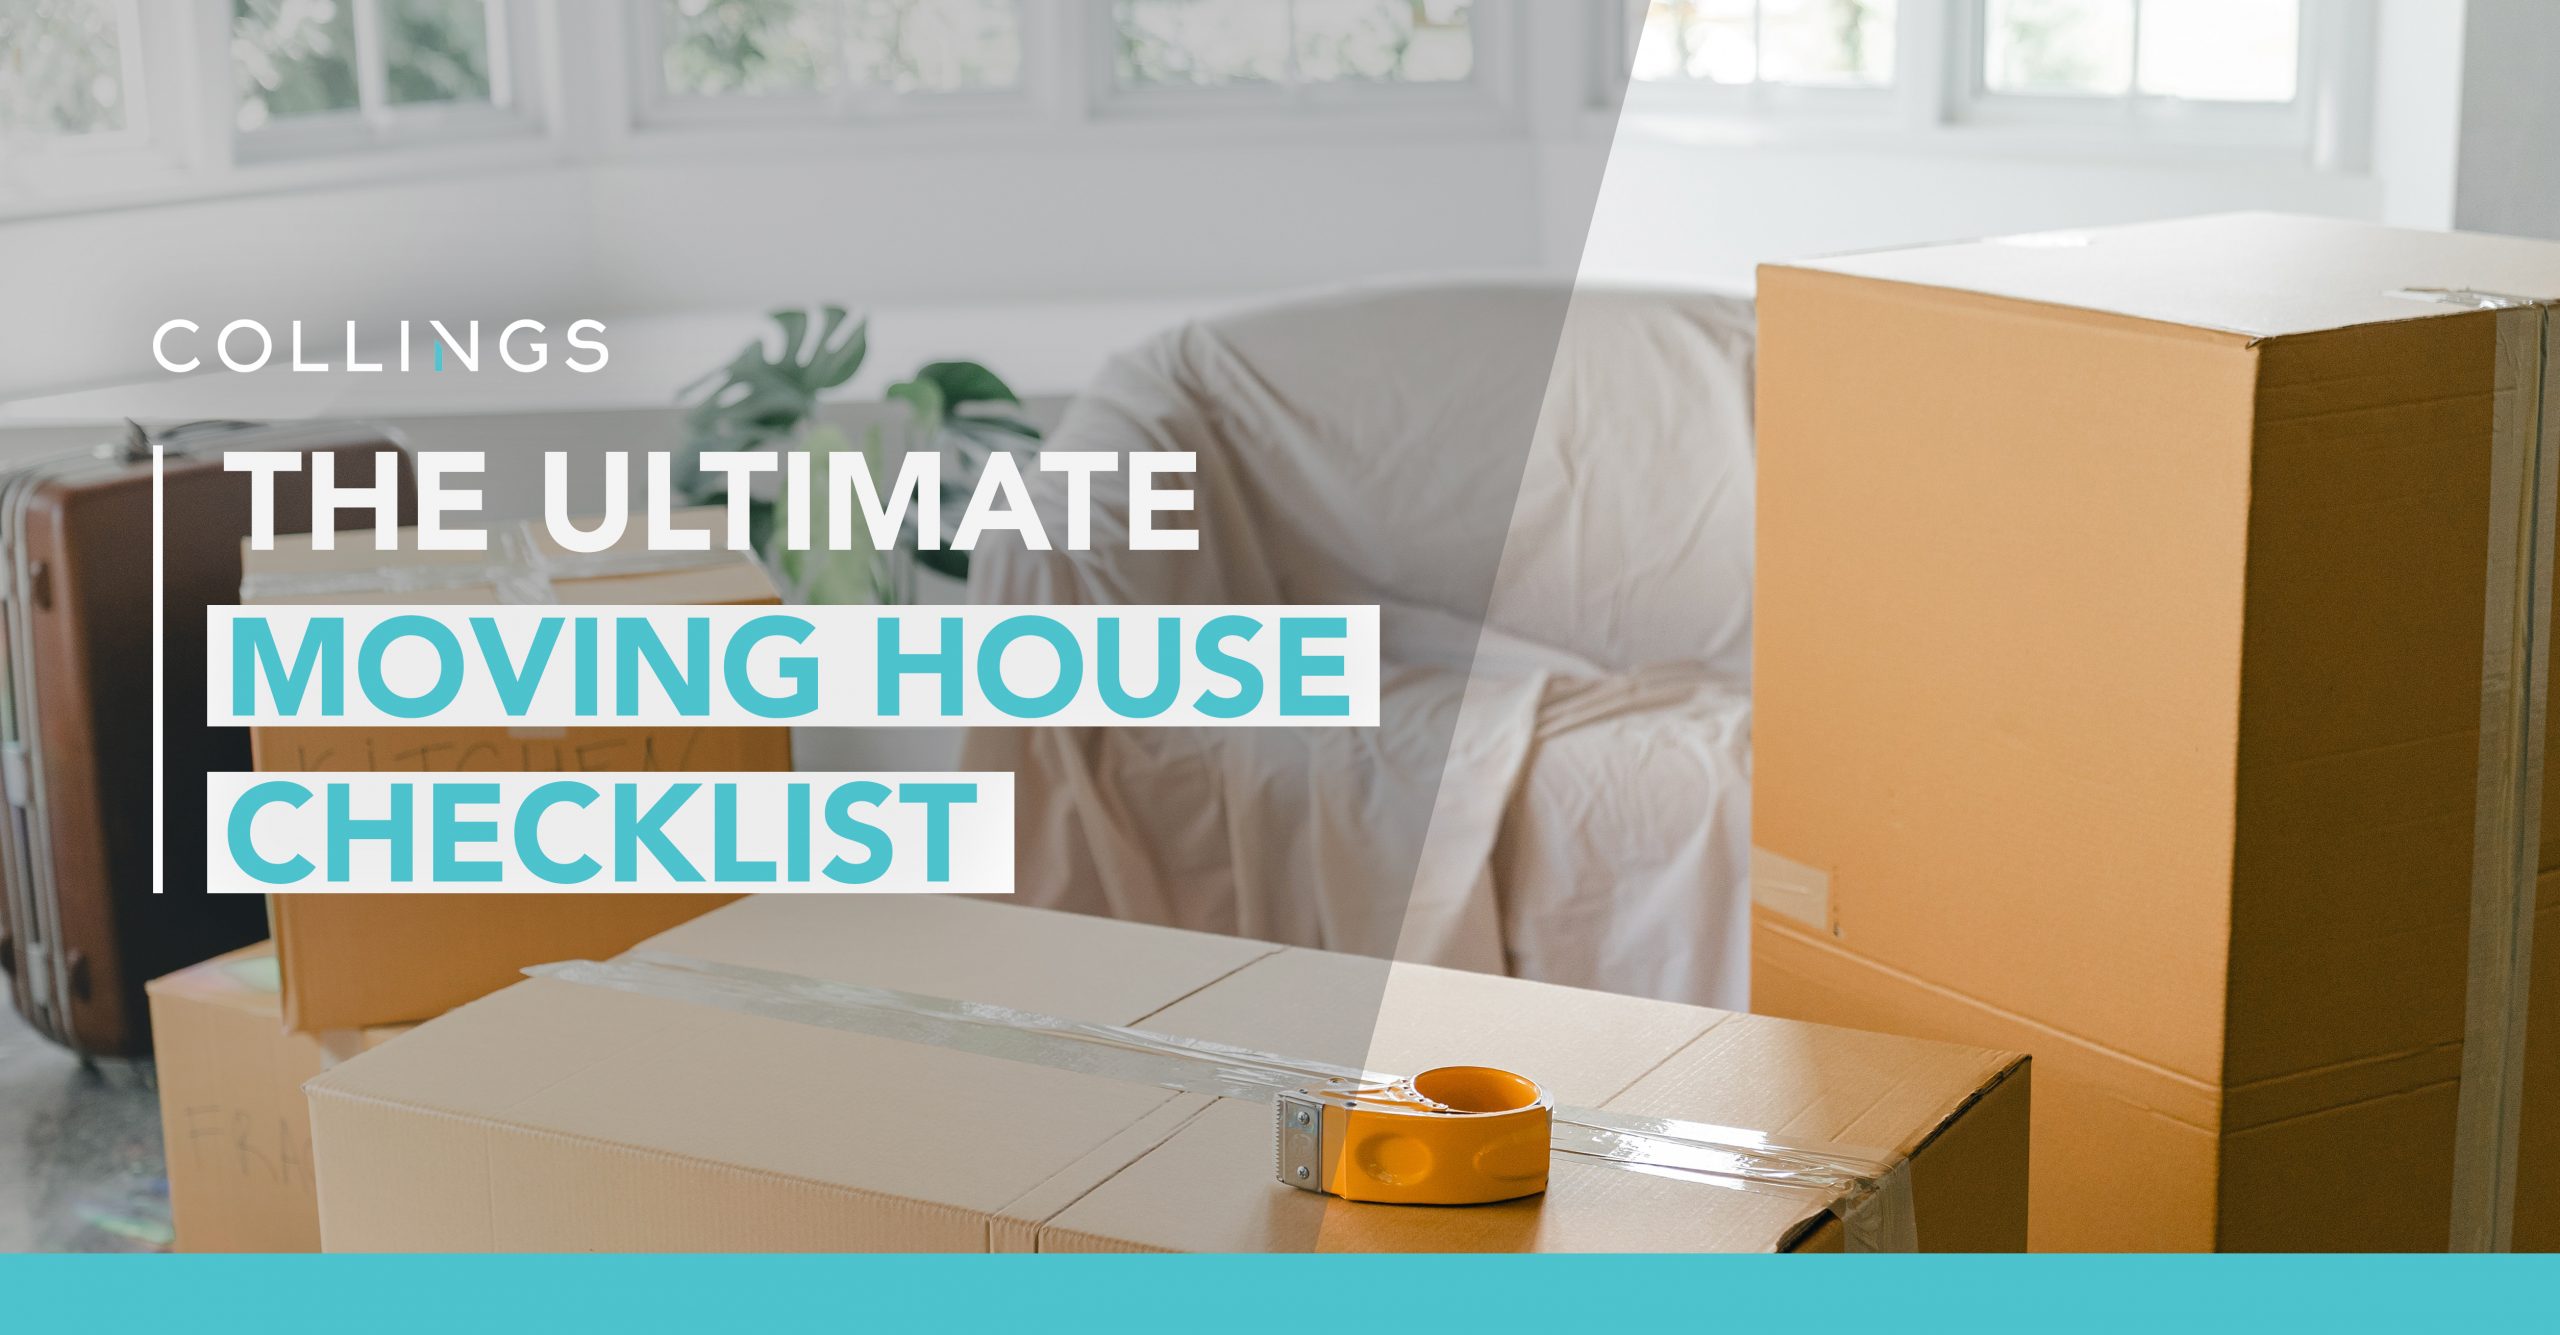 The Ultimate Moving House Checklist